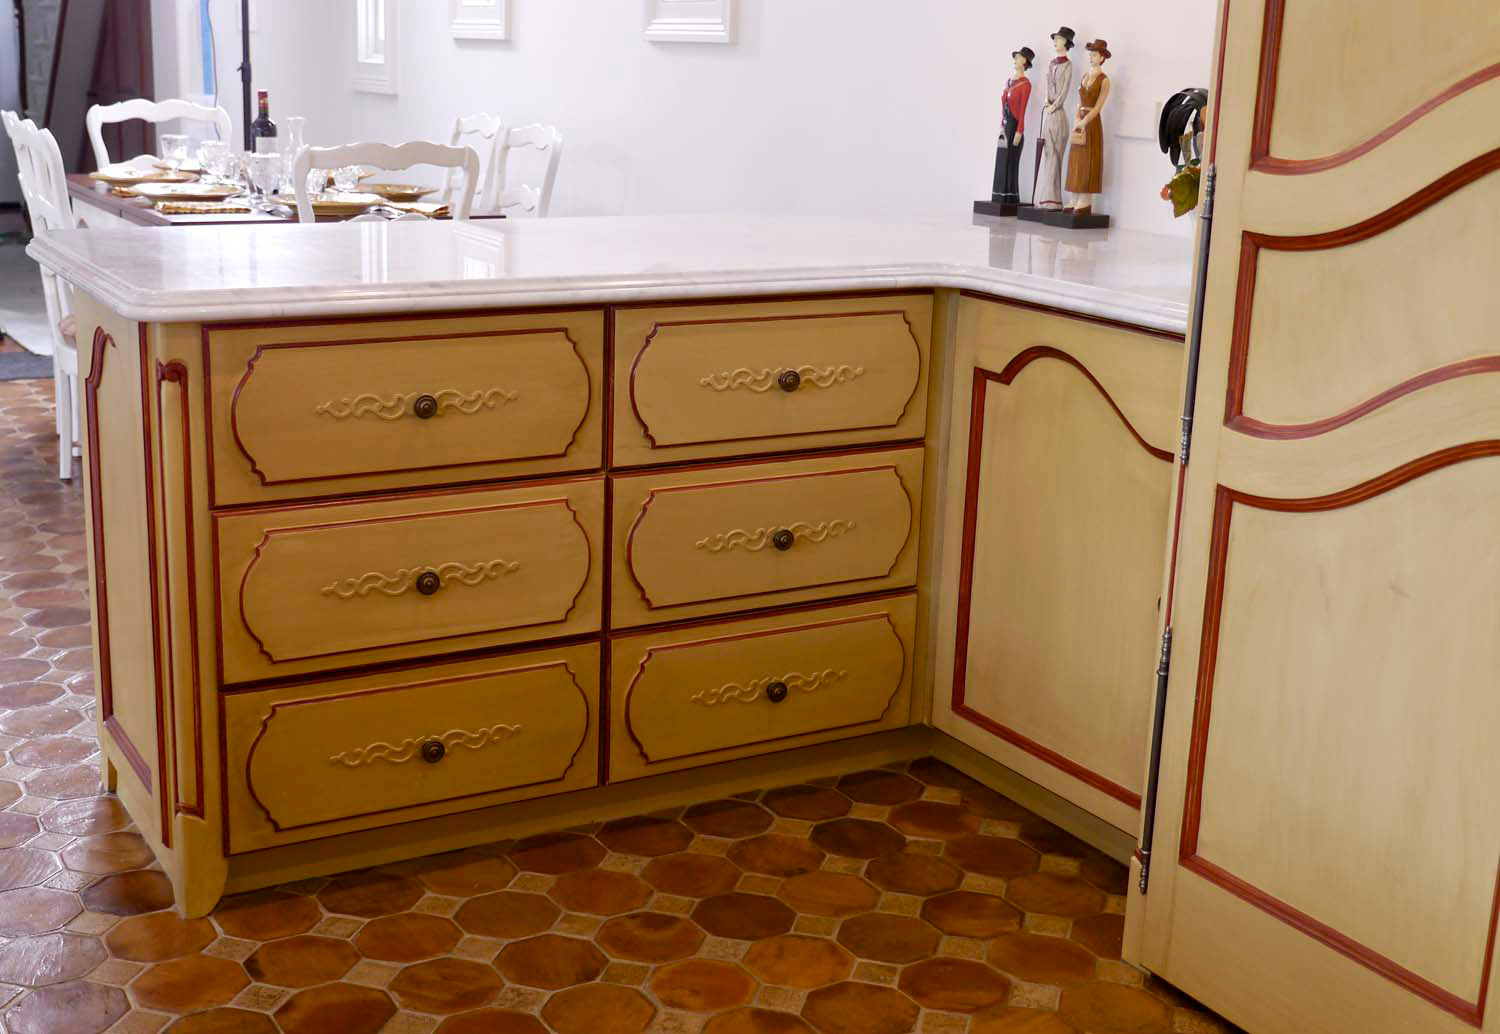 21 French provincial and classic kitchens